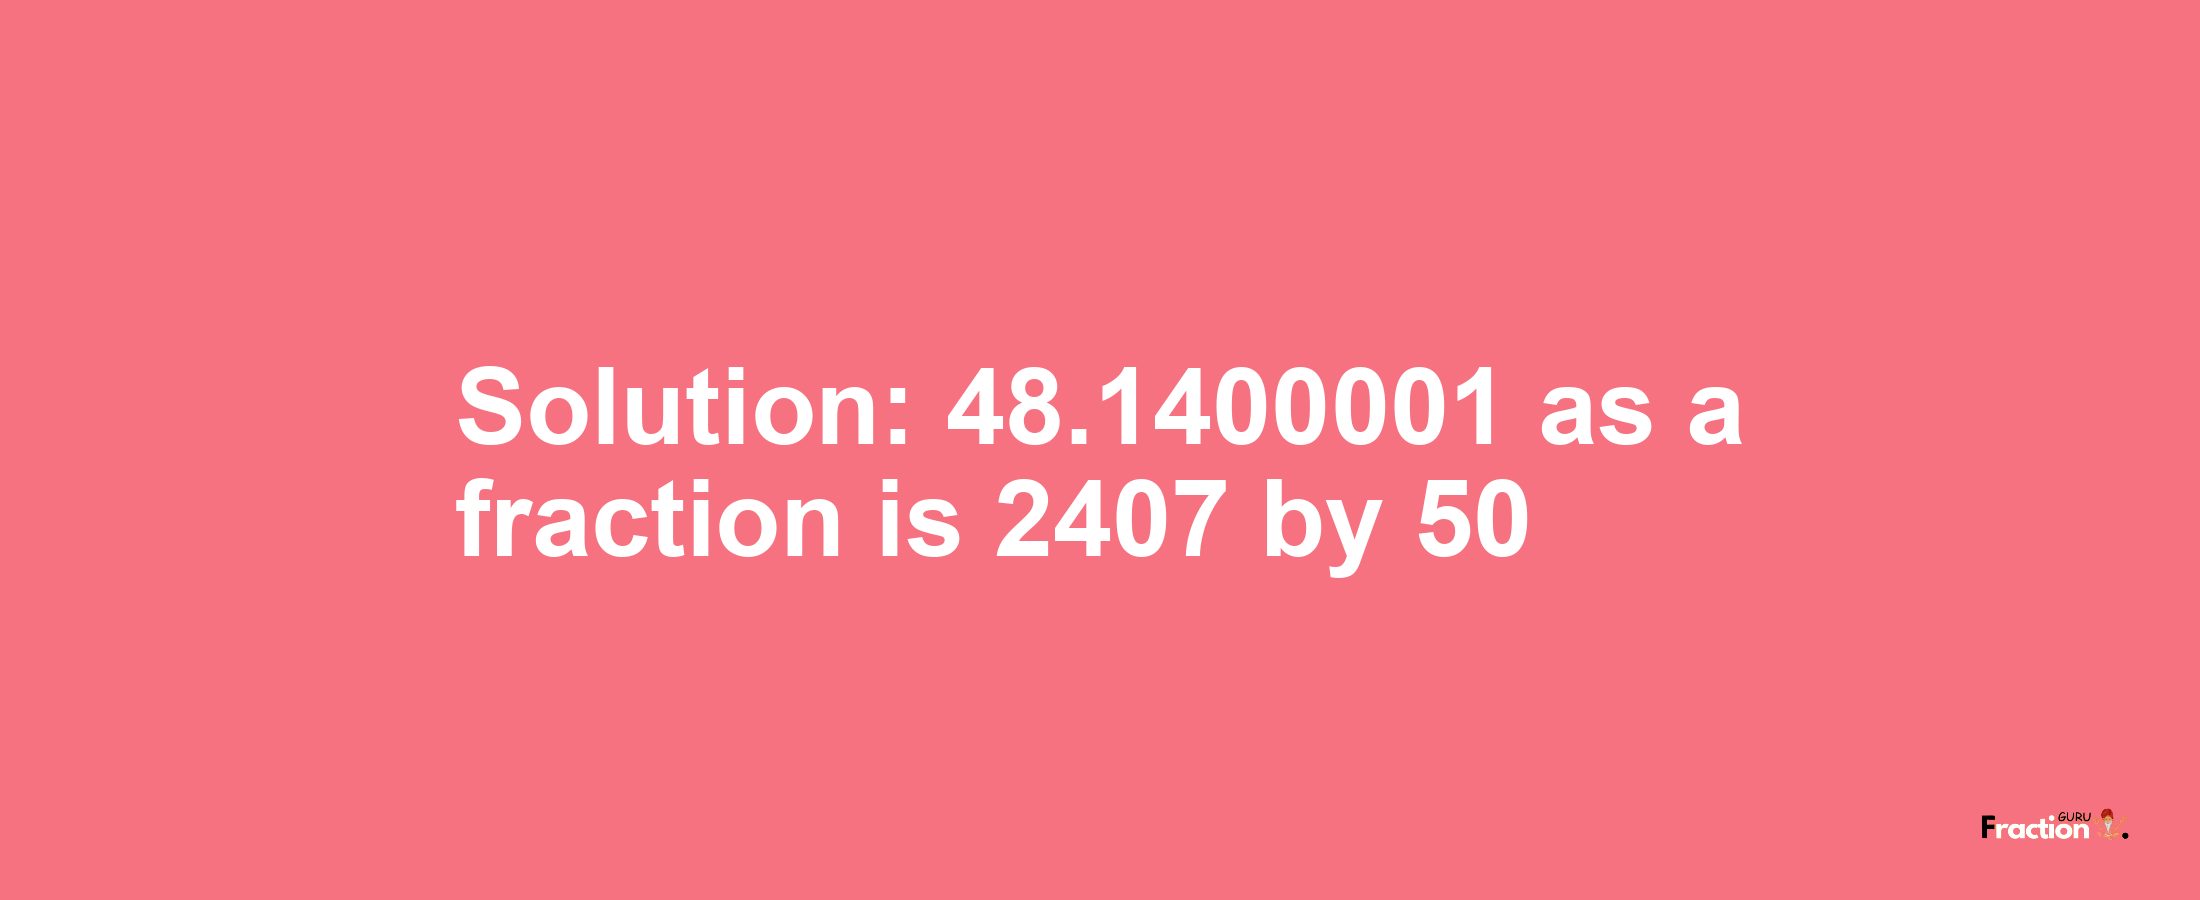 Solution:48.1400001 as a fraction is 2407/50